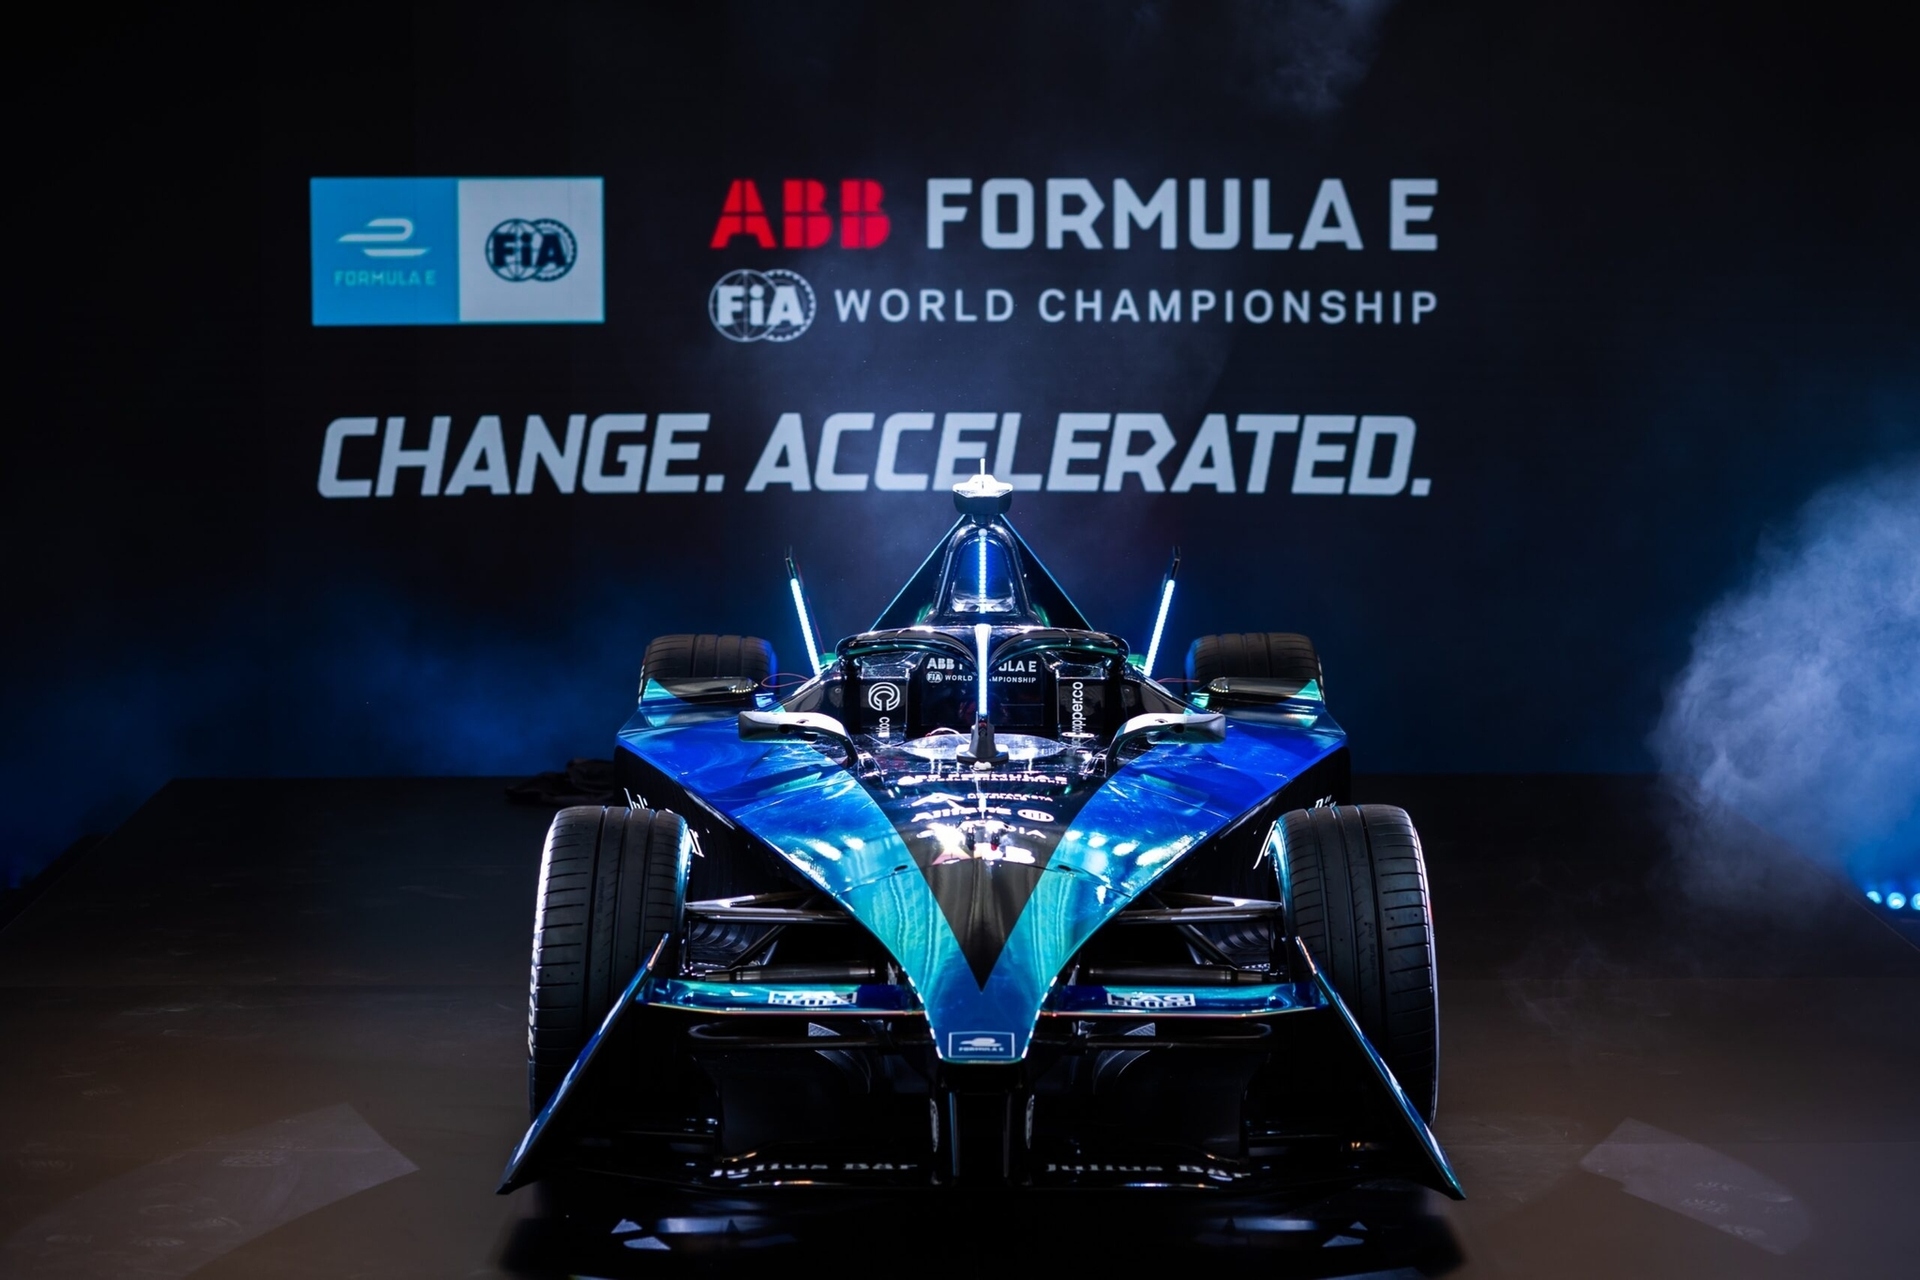 Gen3: the Gen3 single-seater is highly innovative and will be used from the ninth season of the FIA ​​ABB Formula E World Championship: squaring the circle between performance and sustainability